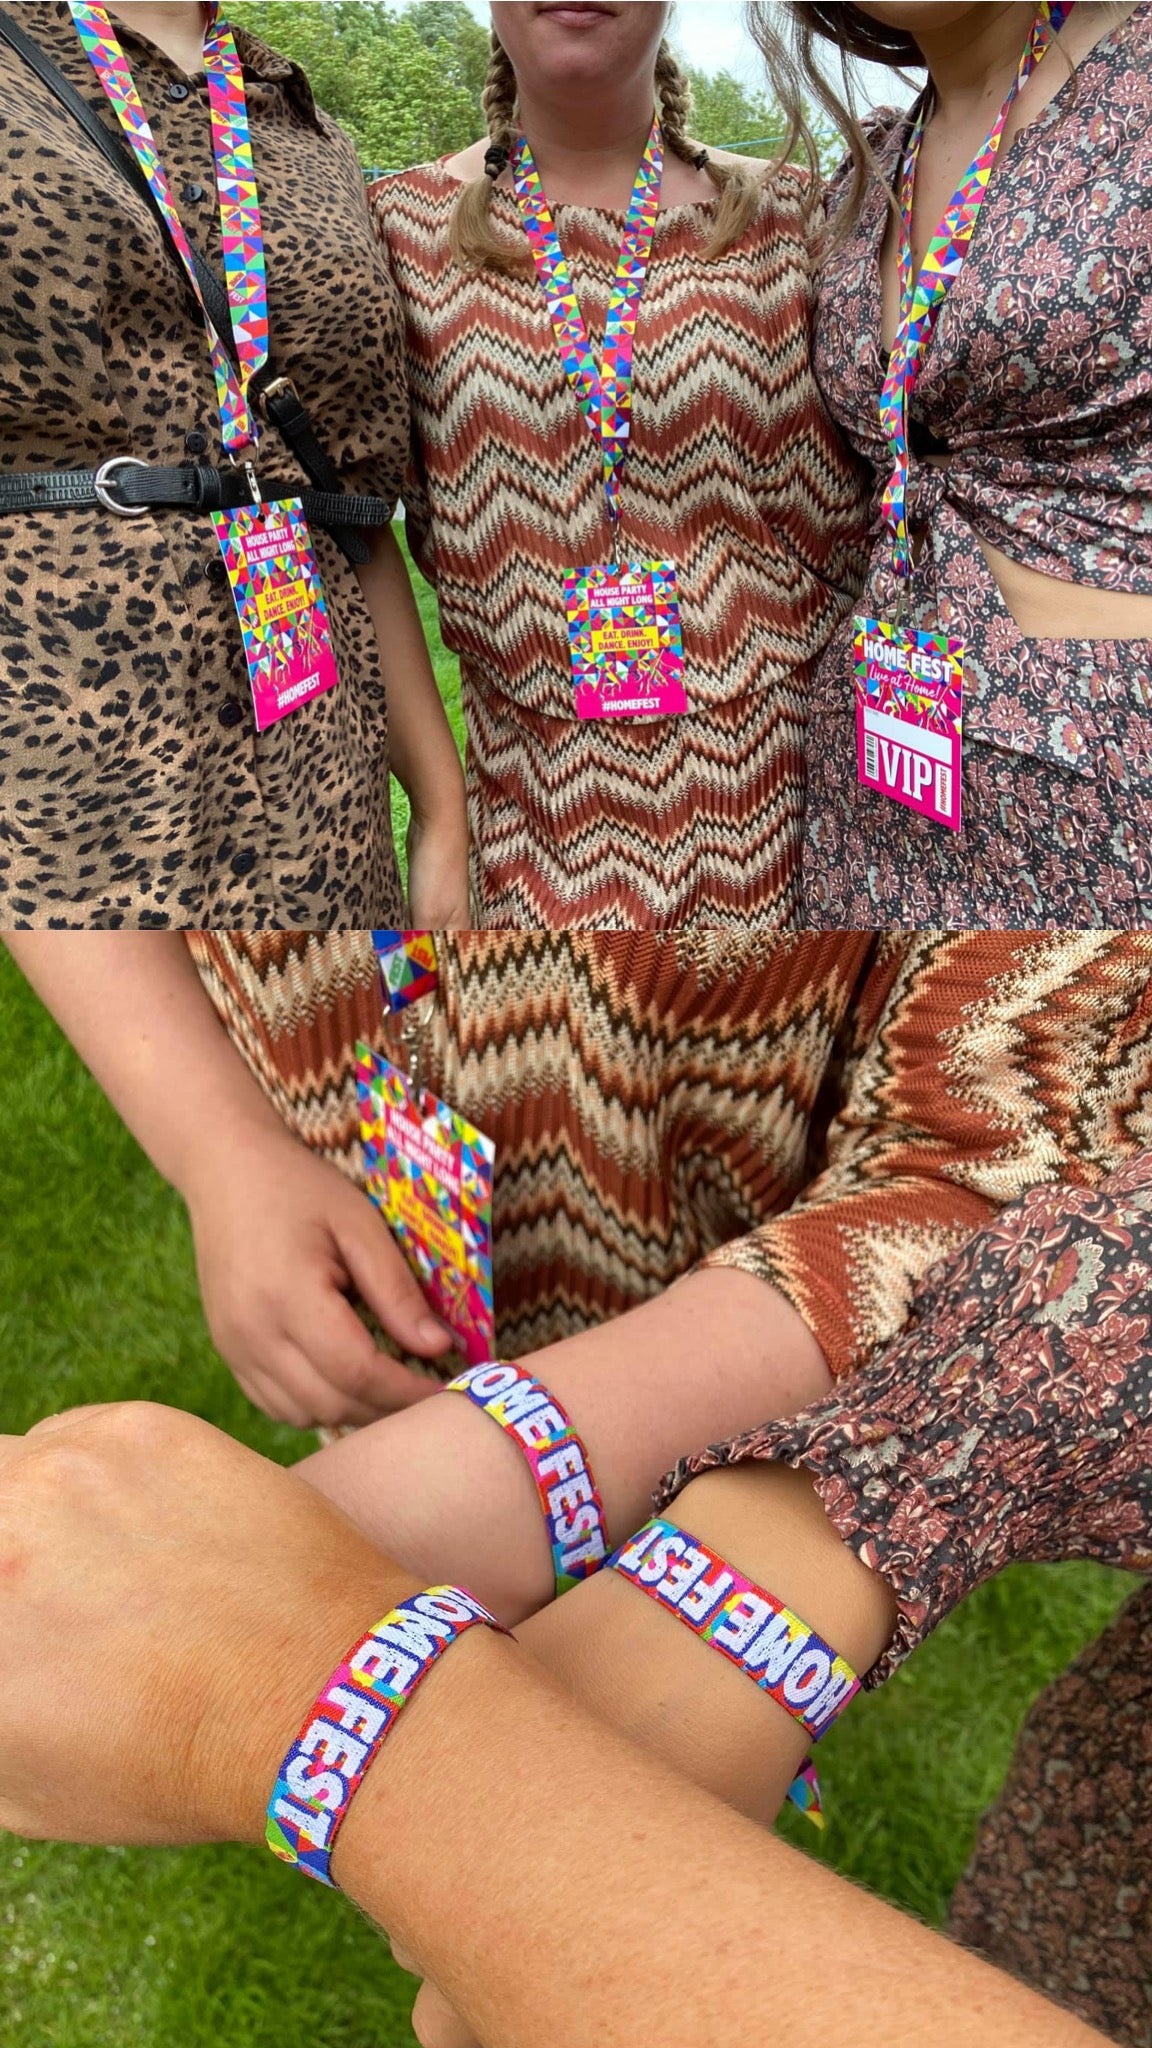 home fest festival party at home lanyards wristbands